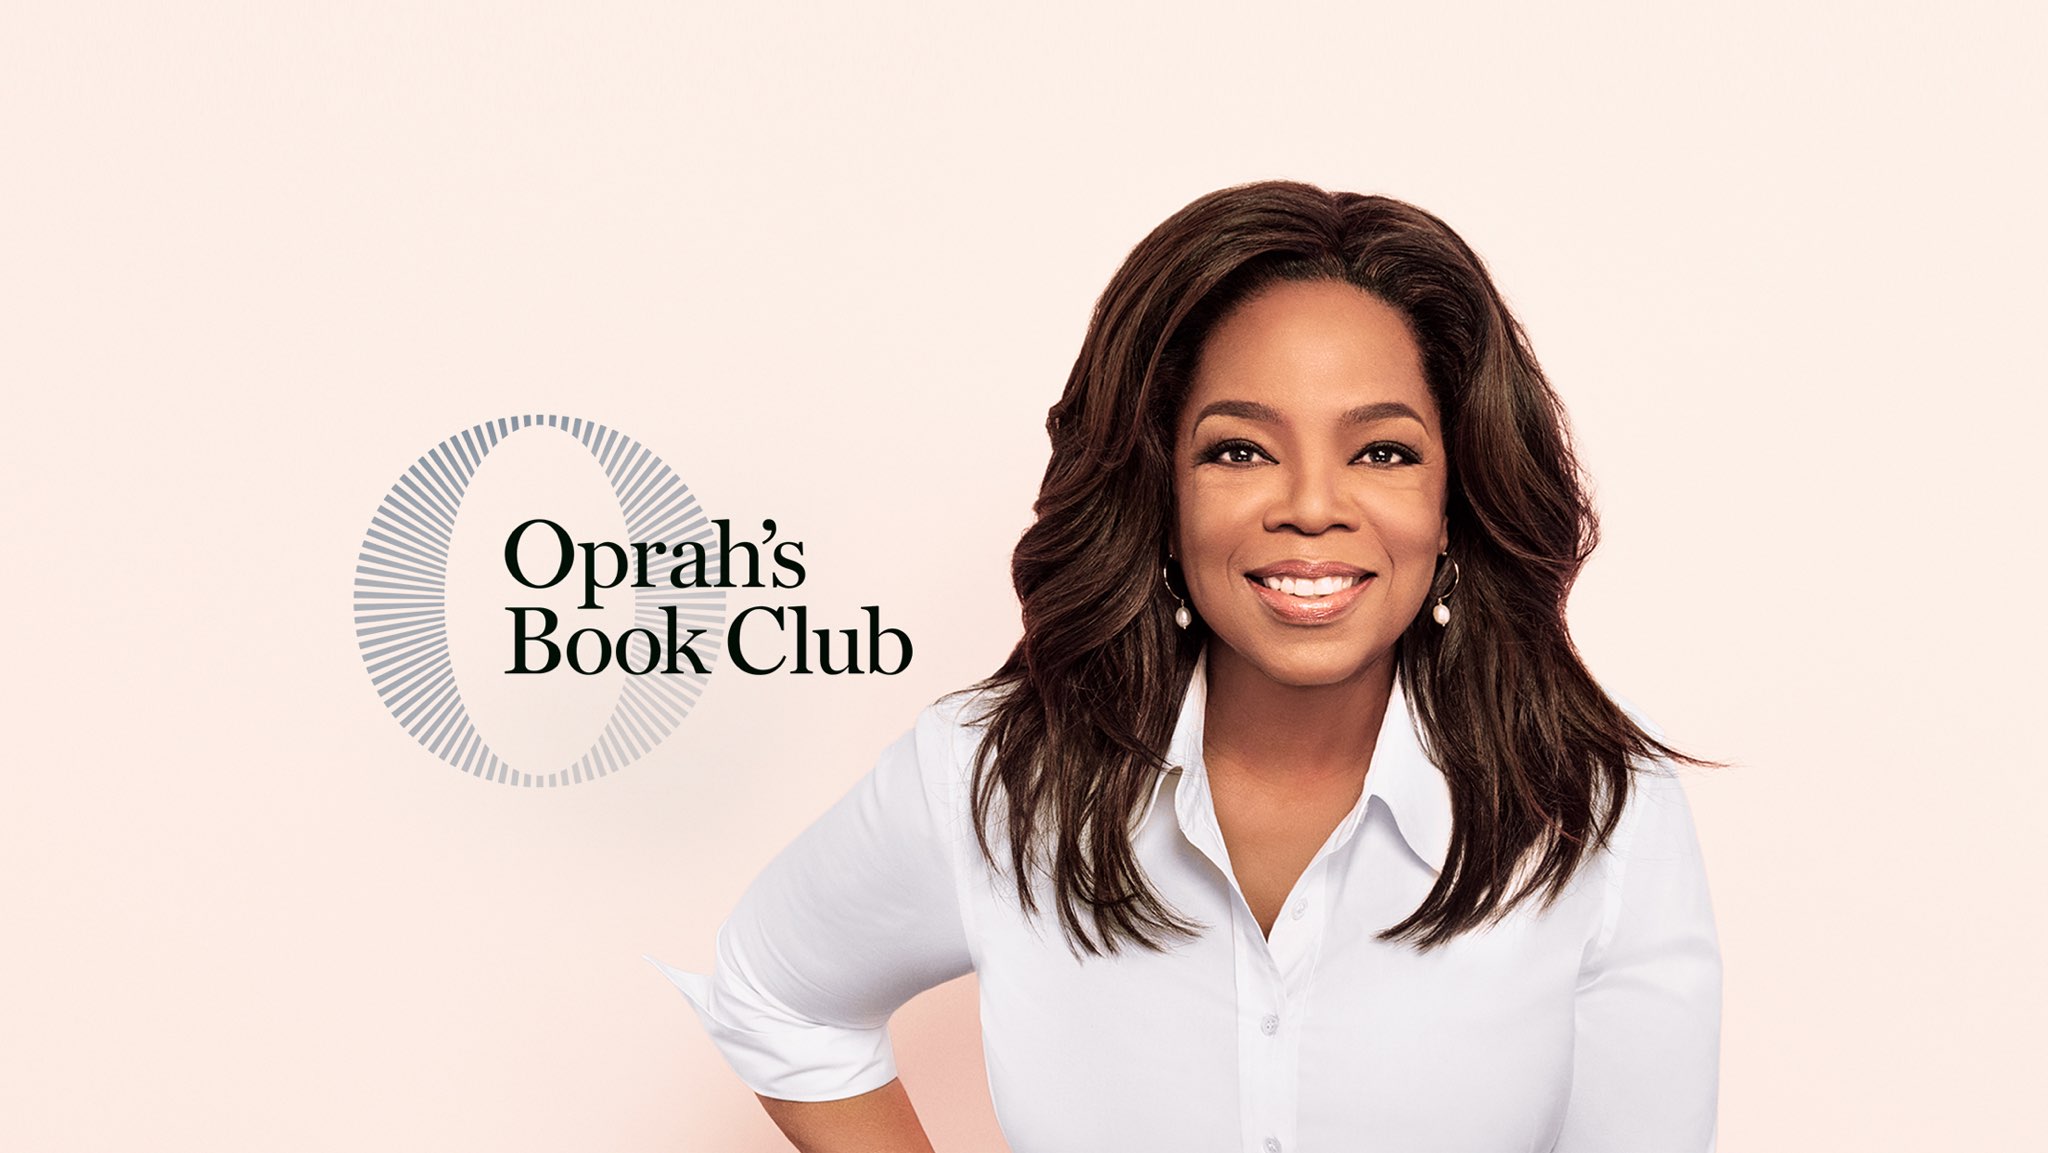 This week’s “Oprah’s Book Club” on Apple TV+ takes on the “American